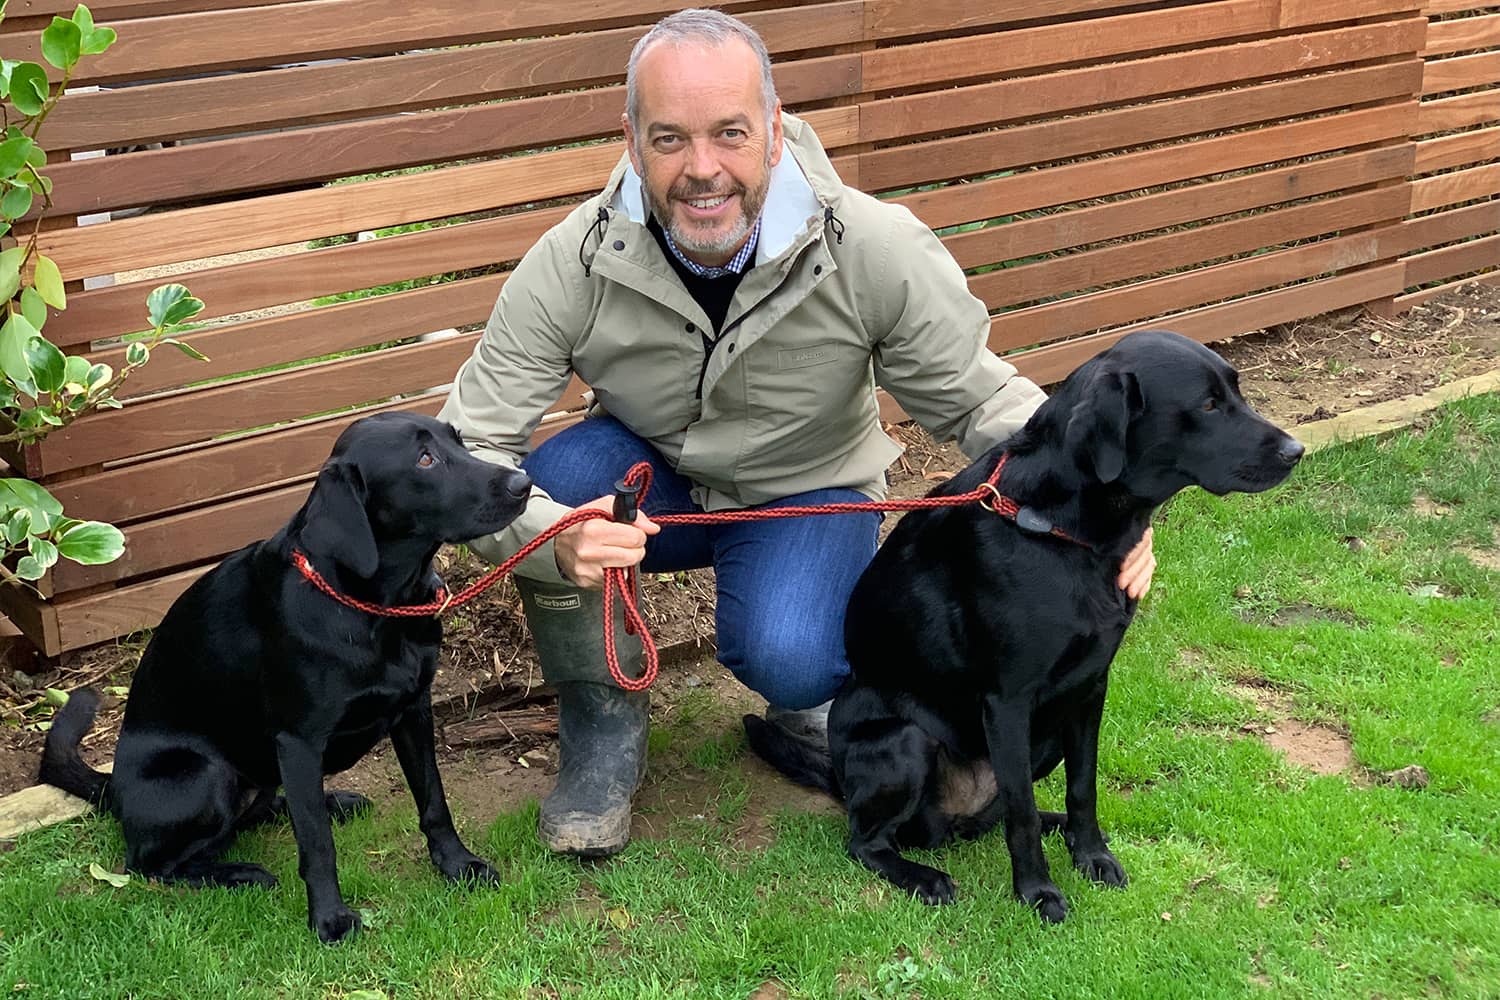 Gripsure Managing Director, Mike Nicholson, with black labradors